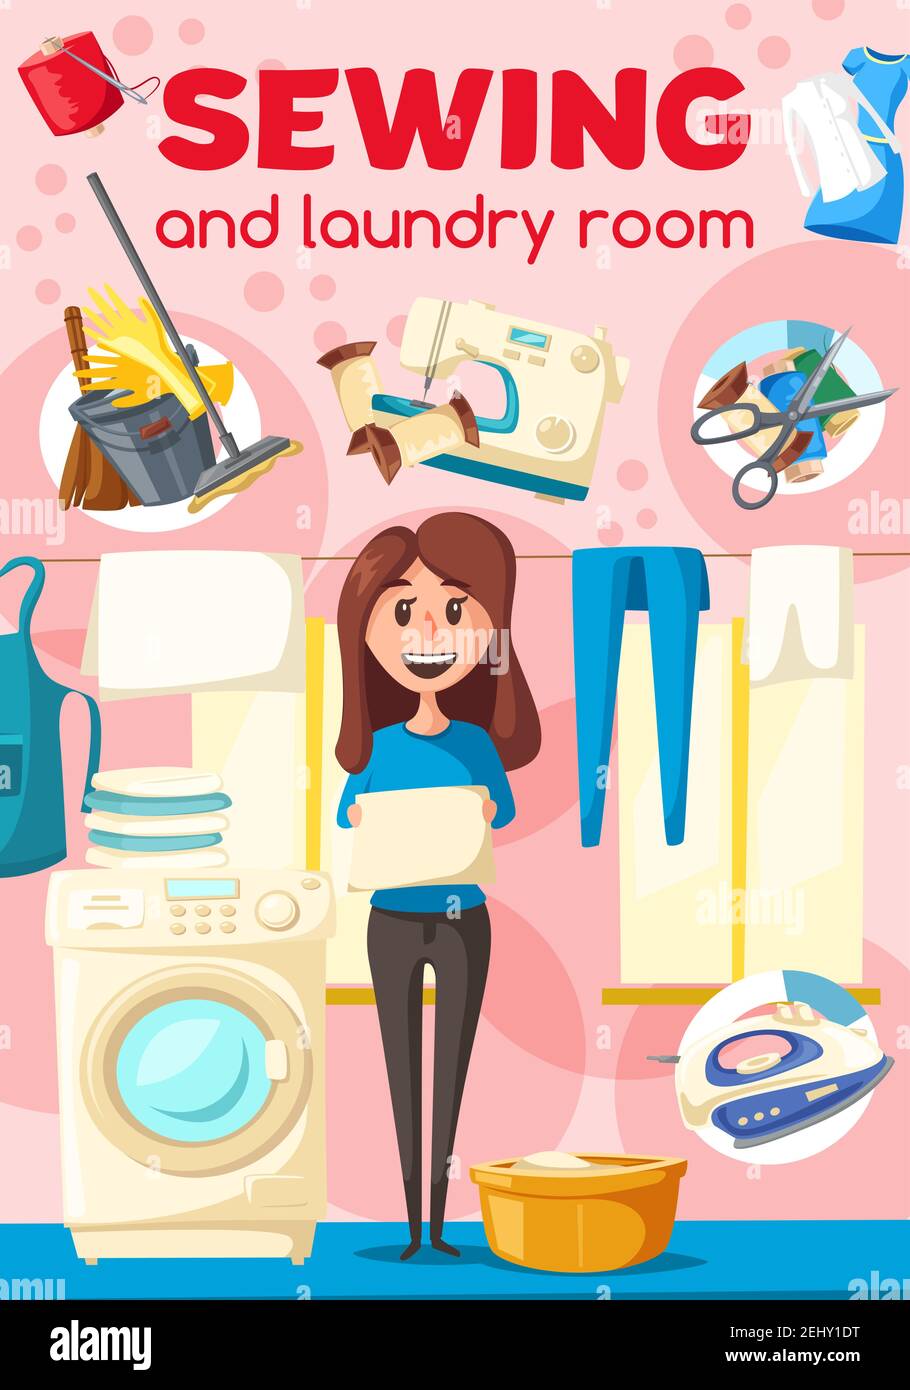 Laundry and sewing poster for dry cleaners service and clothing repair. Woman and washing or sewing machine, iron and thread coils, scissors and basin Stock Vector